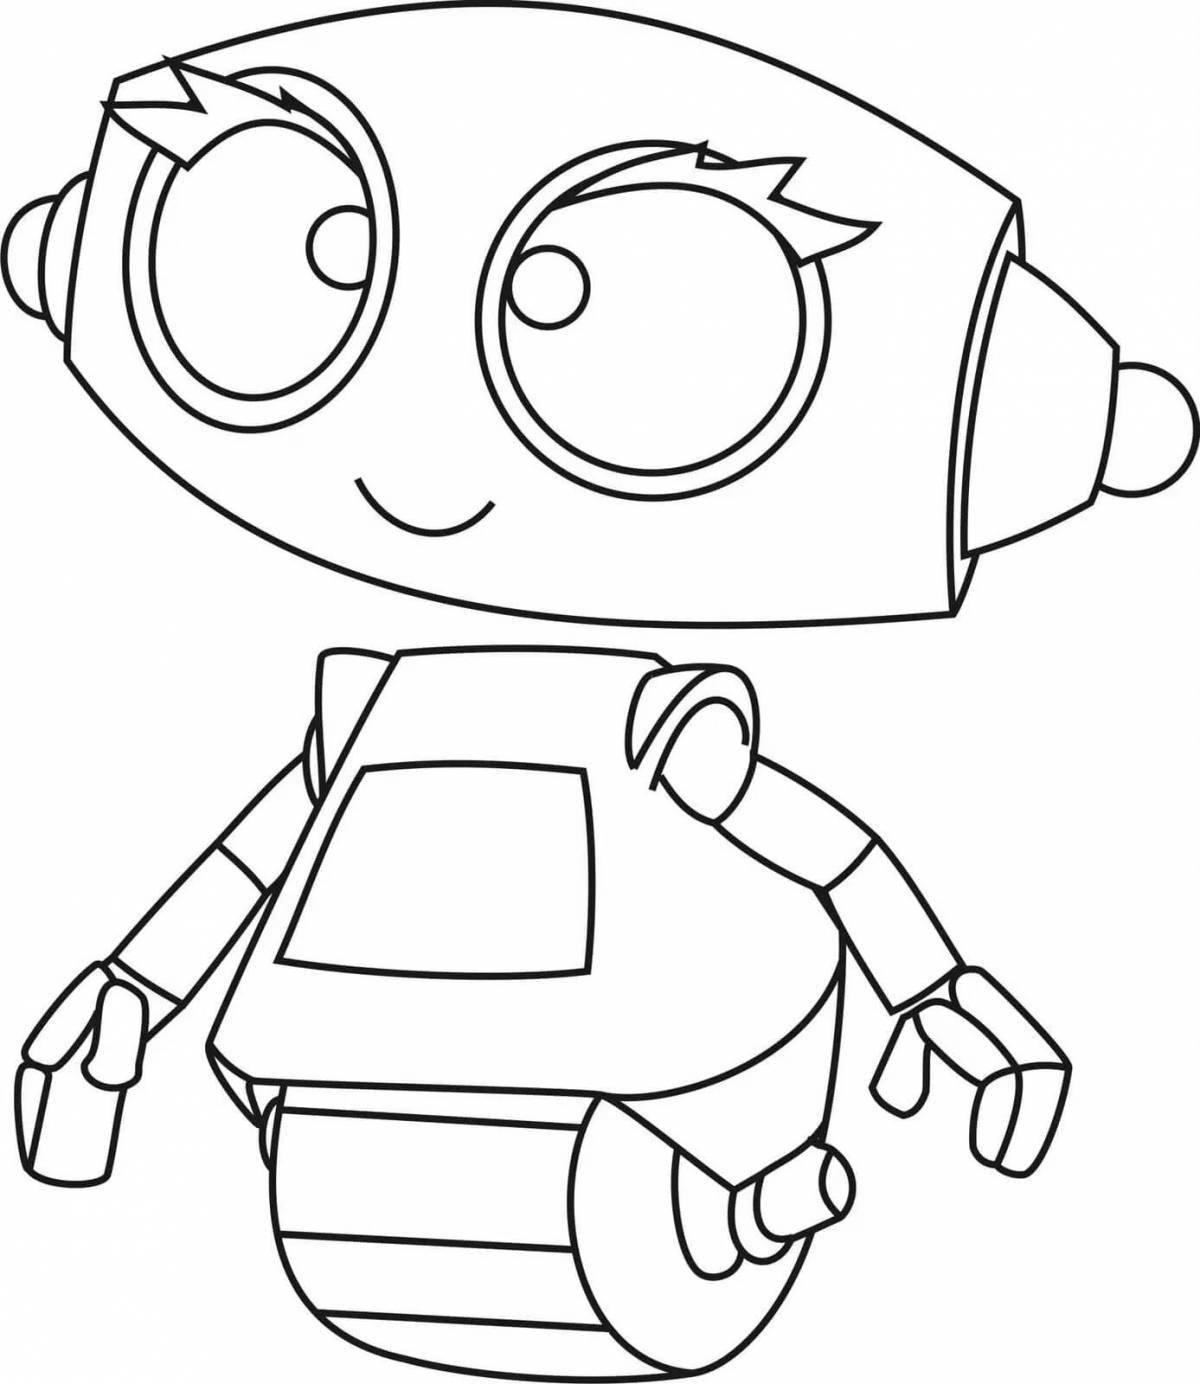 Joyful robot coloring book for 7 year olds